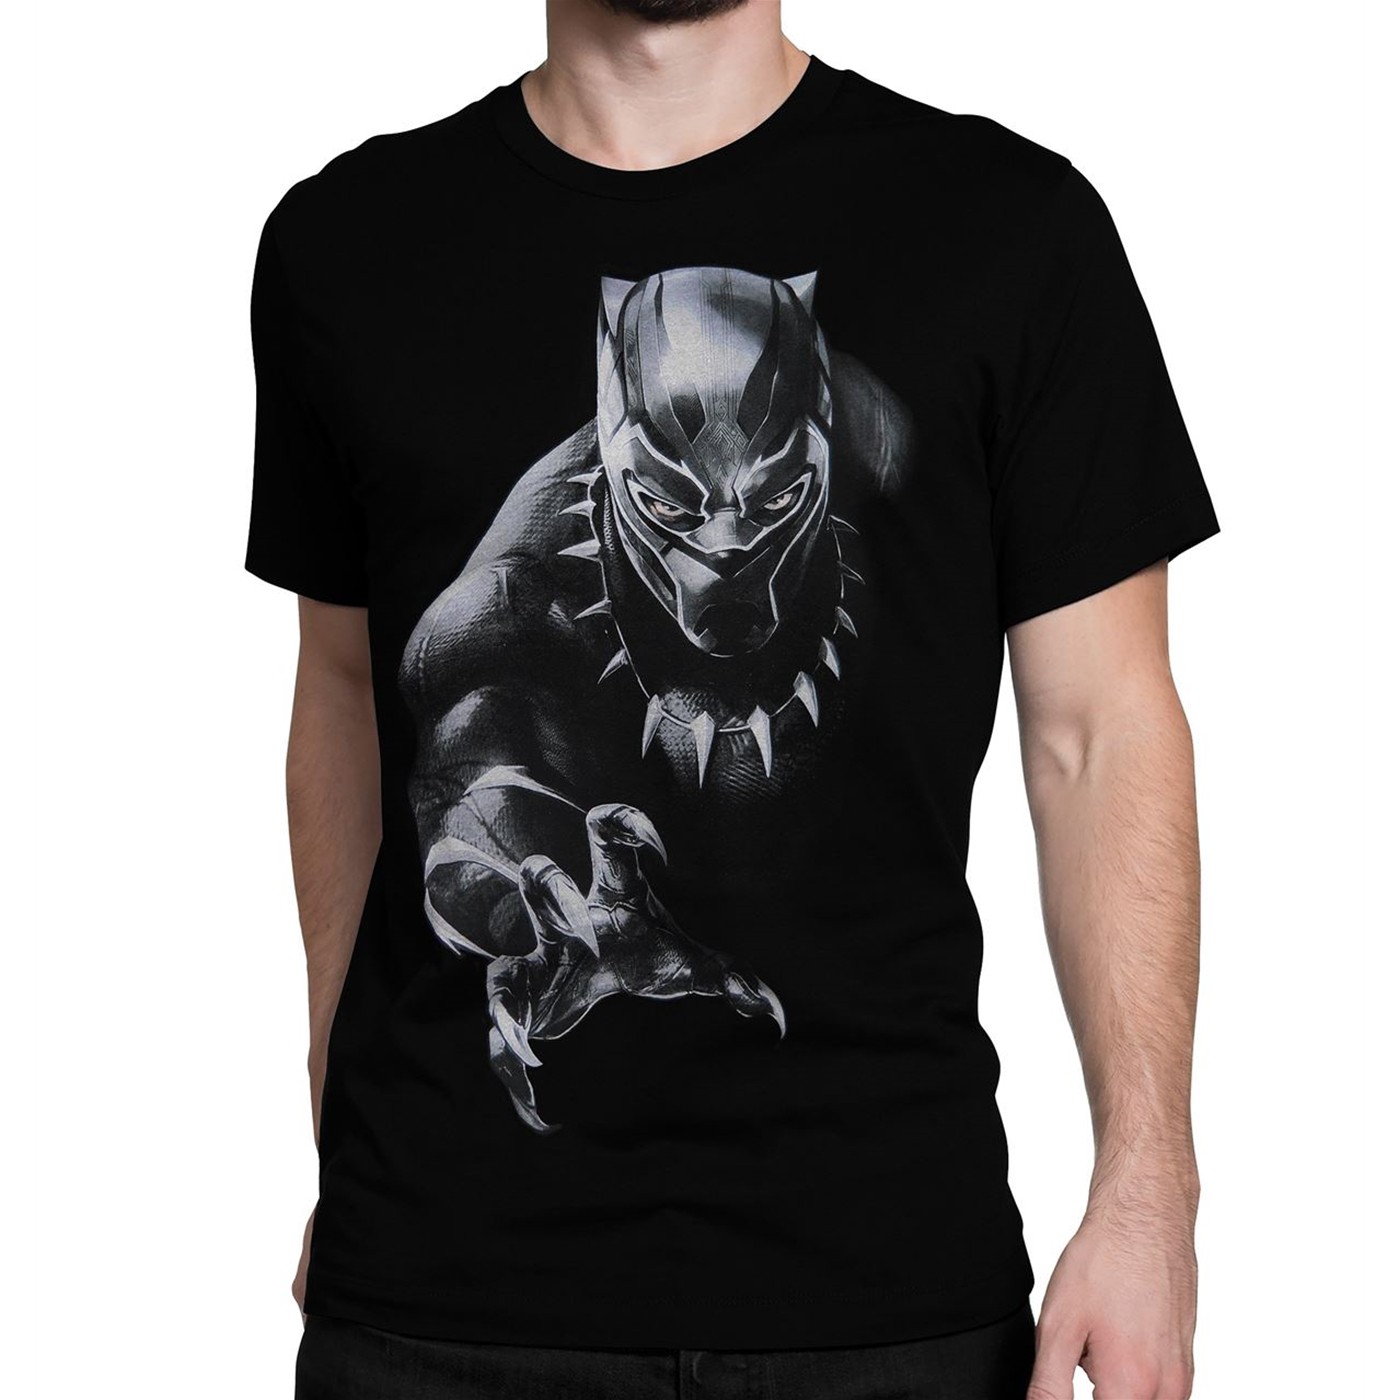 Black Panther Claw Scratch T-Shirt